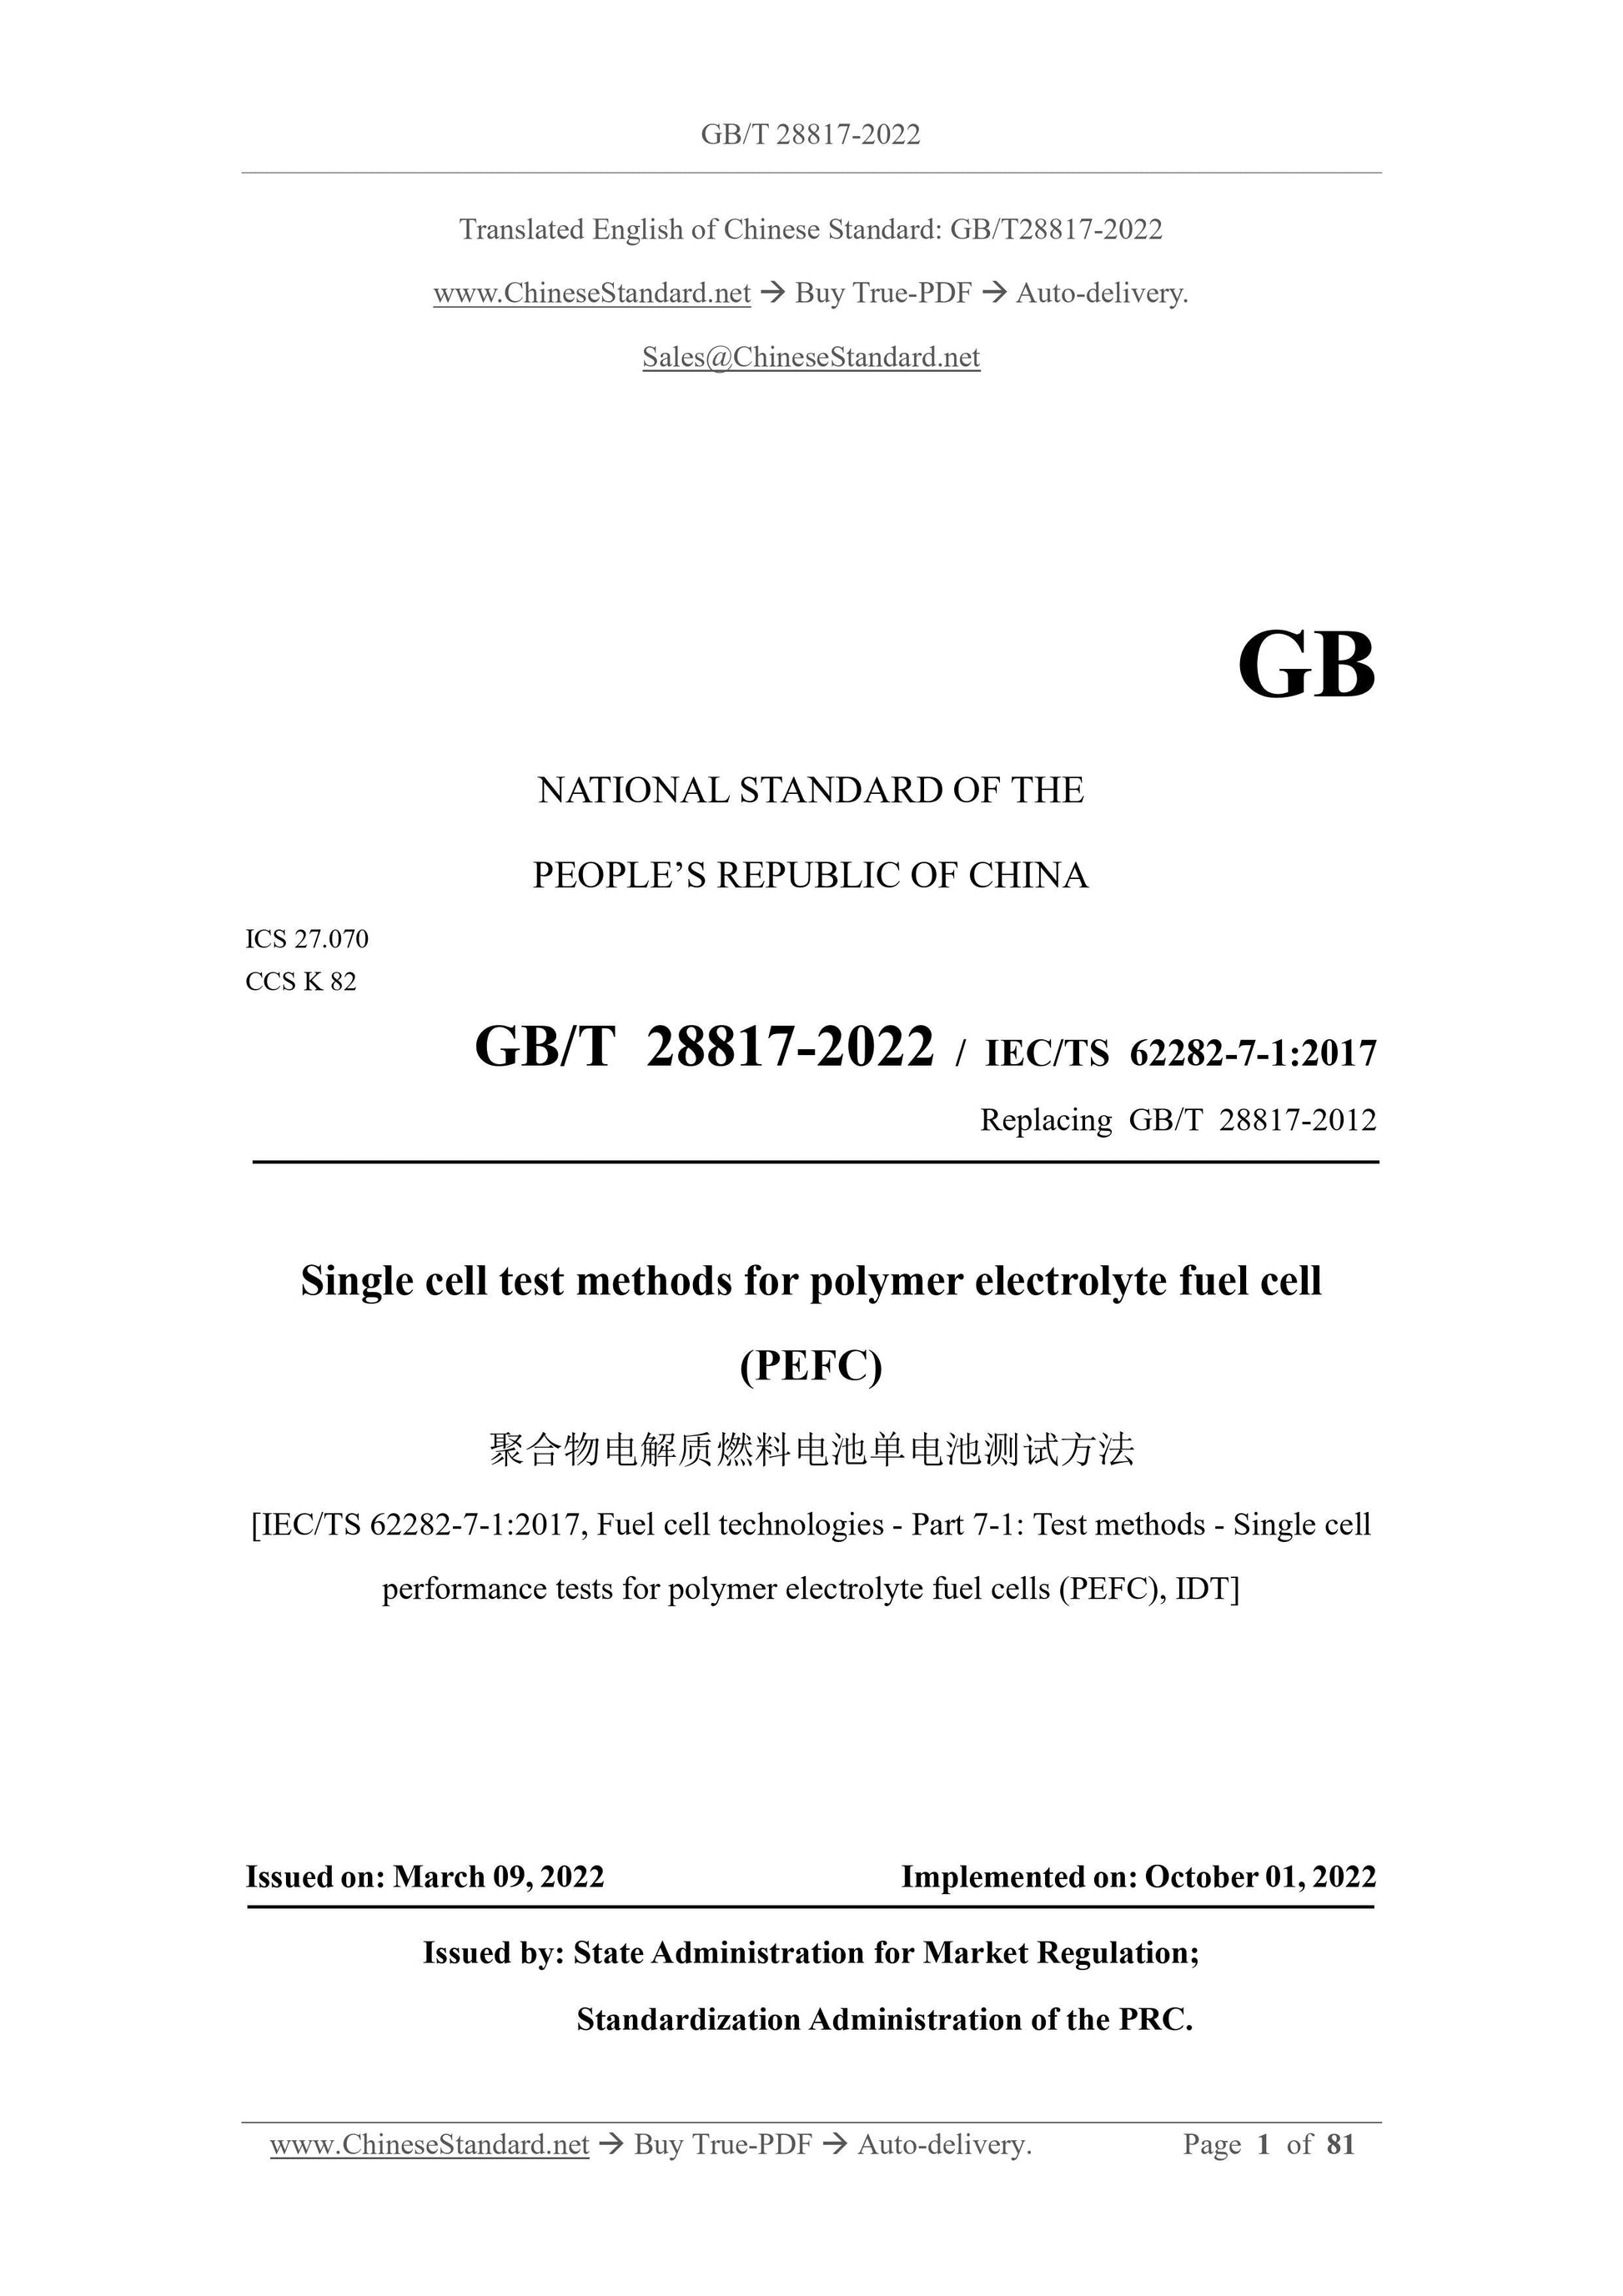 GB/T 28817-2022 Page 1